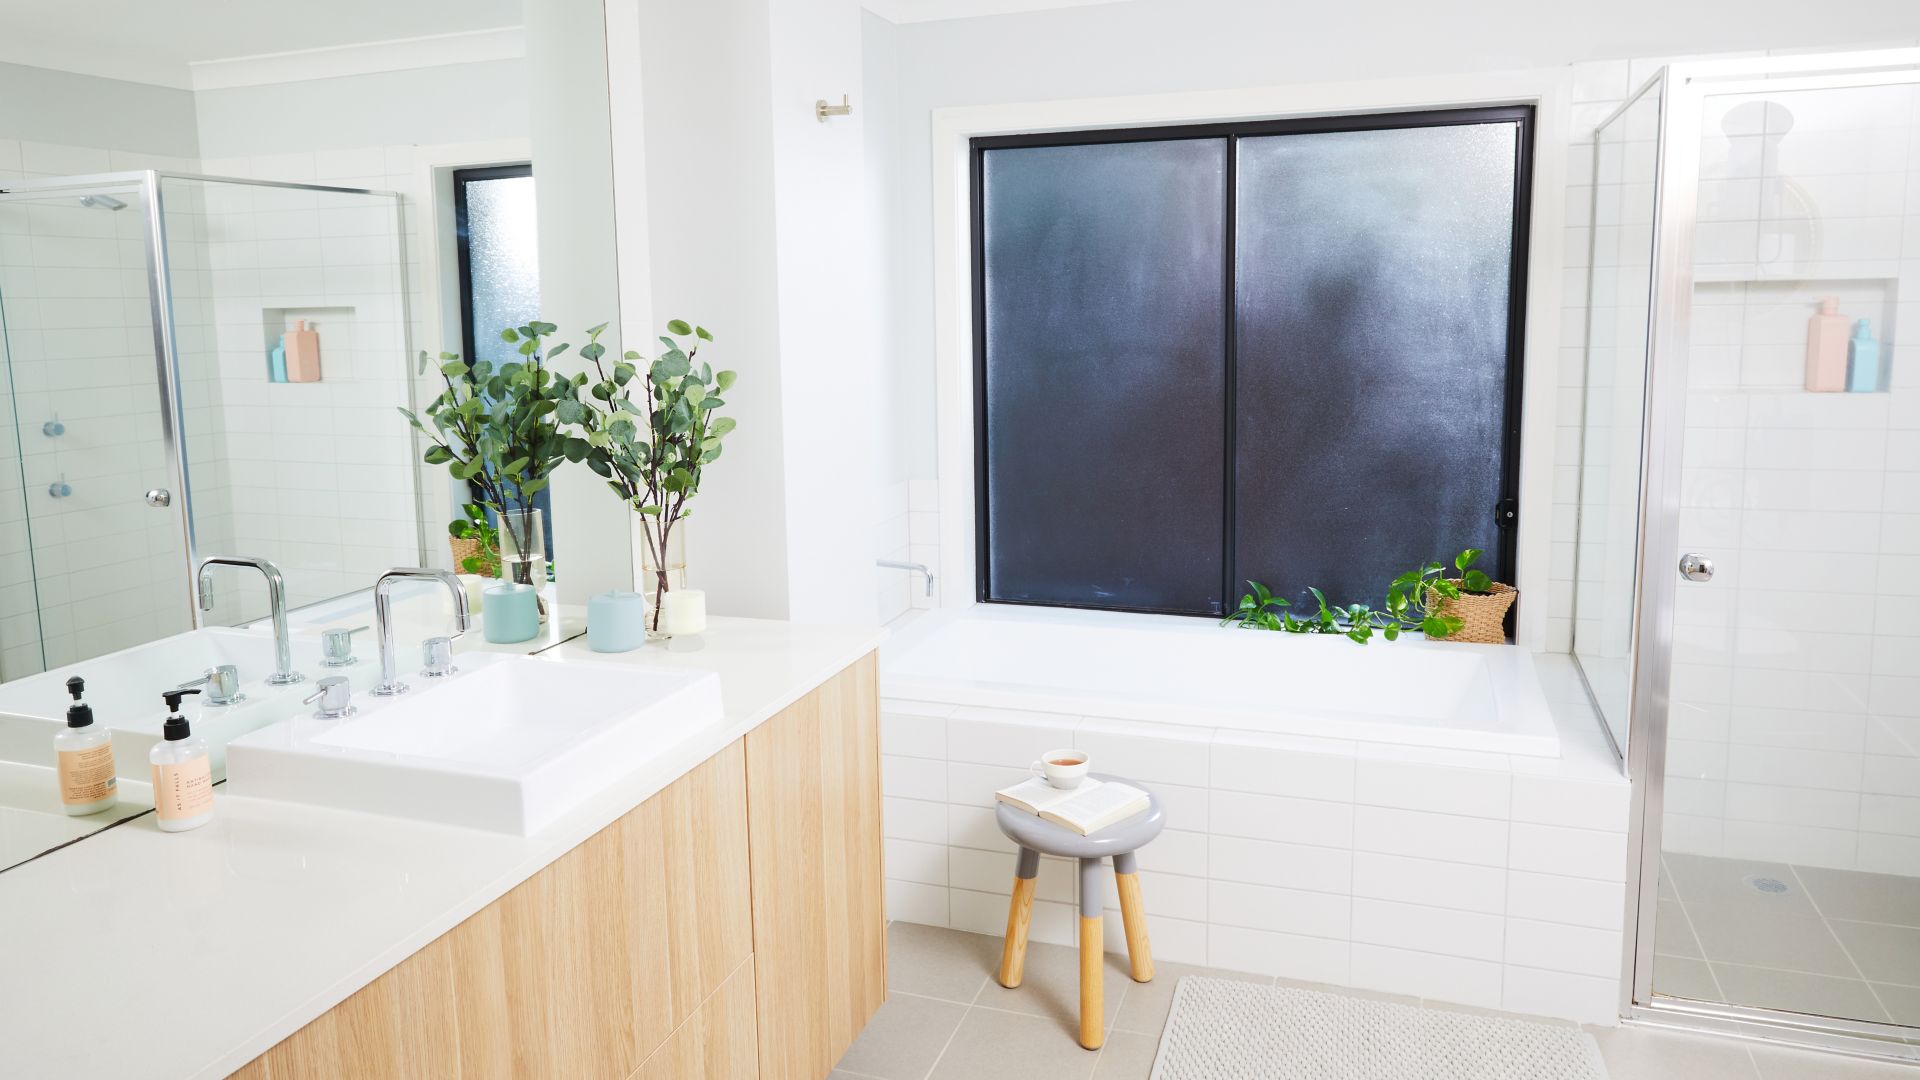 Grout vs Silicone: What's Best When Renovating Your Bathroom?